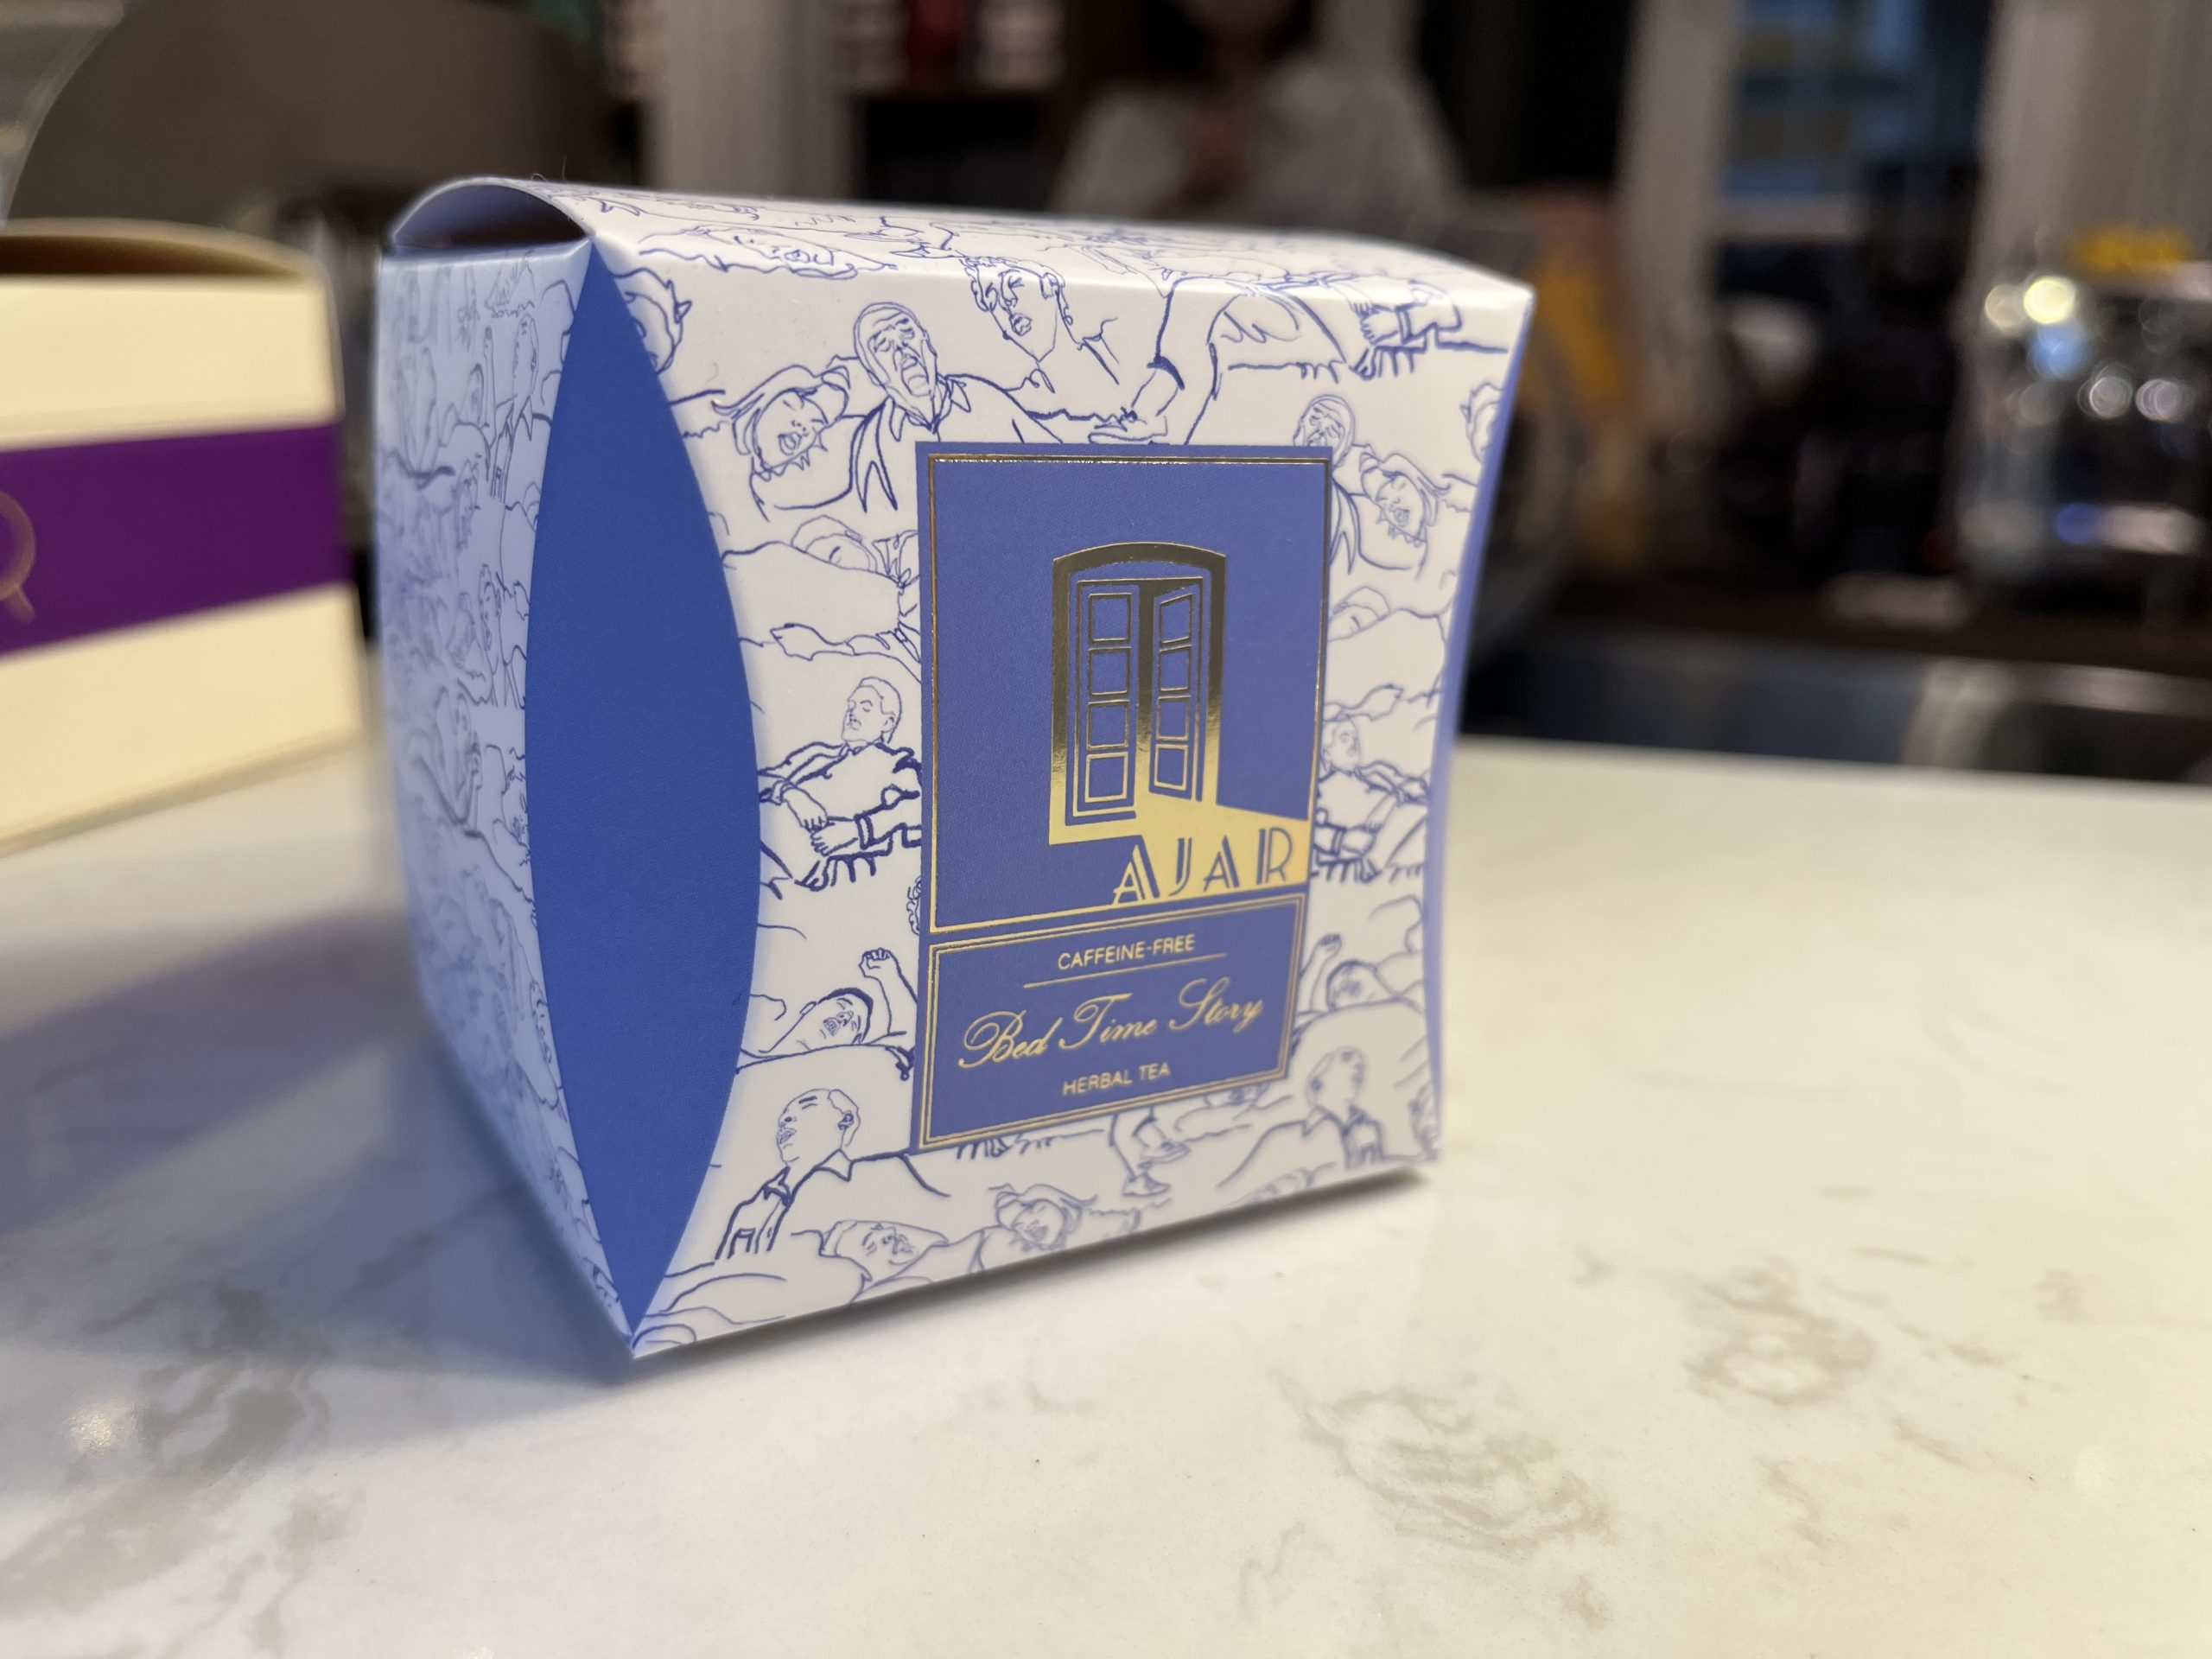 Dores designed all of the logos, packaging and signs associated with his cafe, including the ‘Bed Time Story’ gift box, which depicts slumbering characters